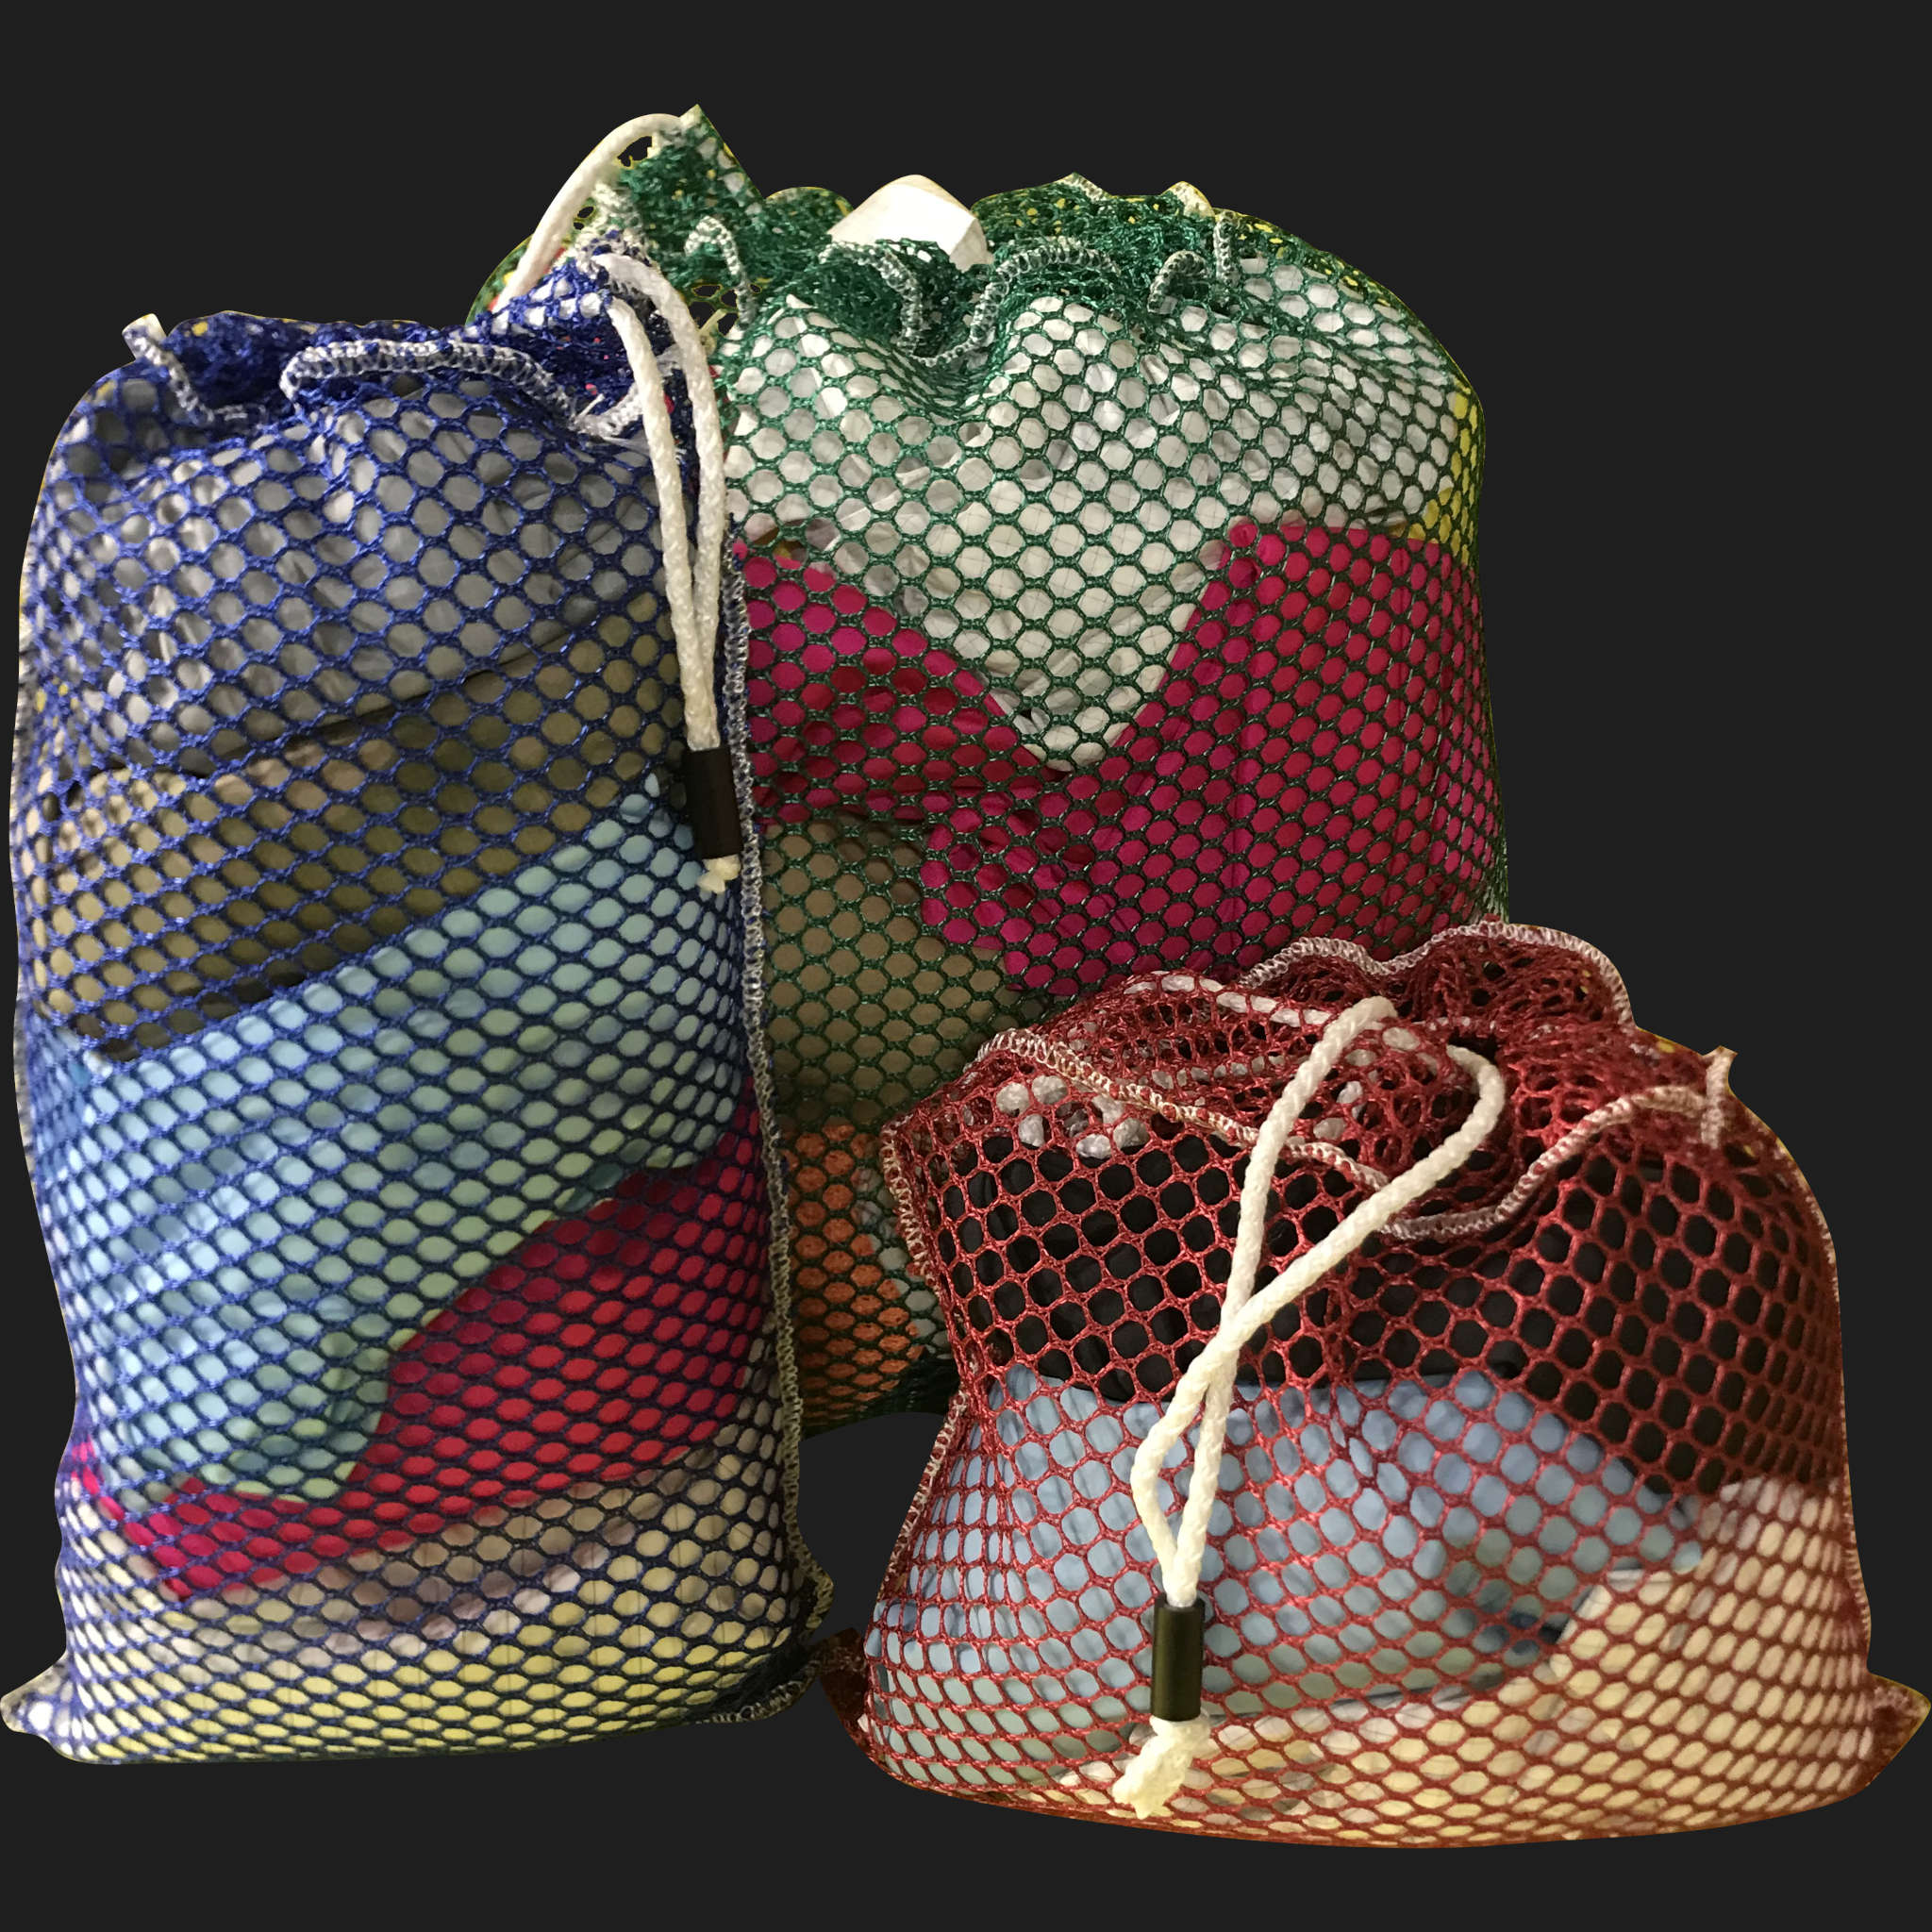 52" x 70" Customized Mesh-Net-Laundry Bags Heavy Duty with Cord and barrellock closure